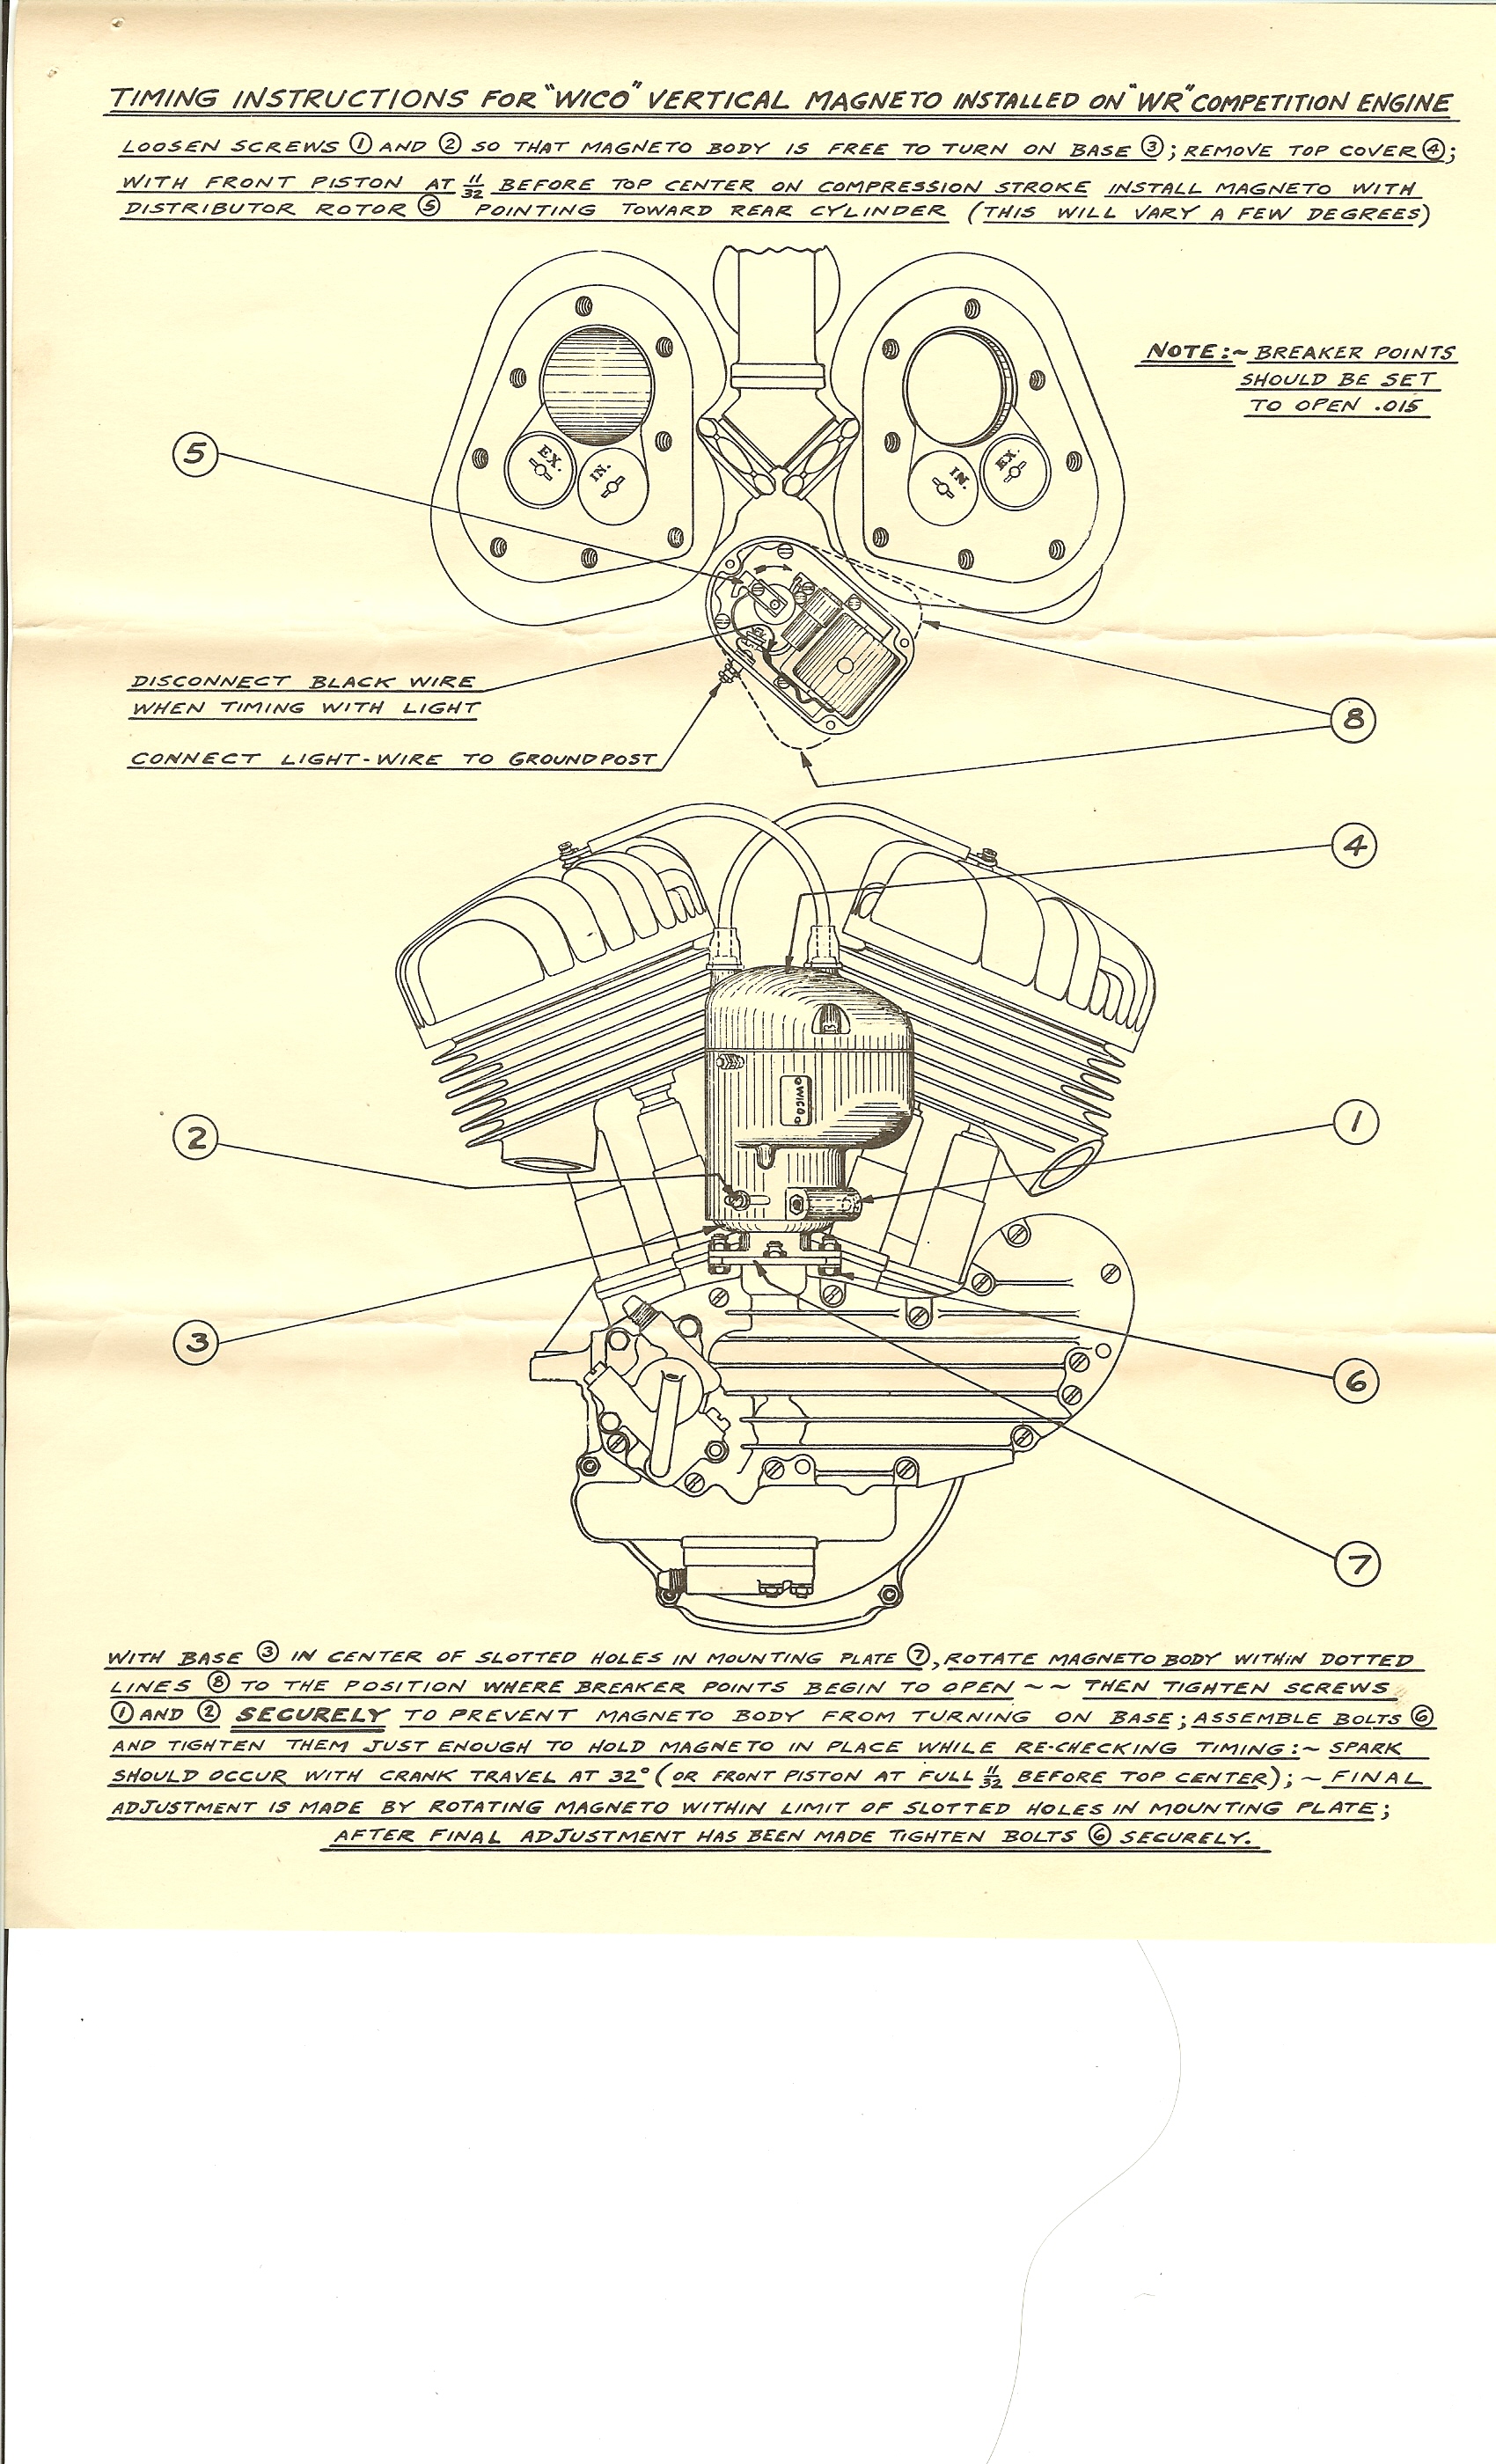 1948 WR instructions 11